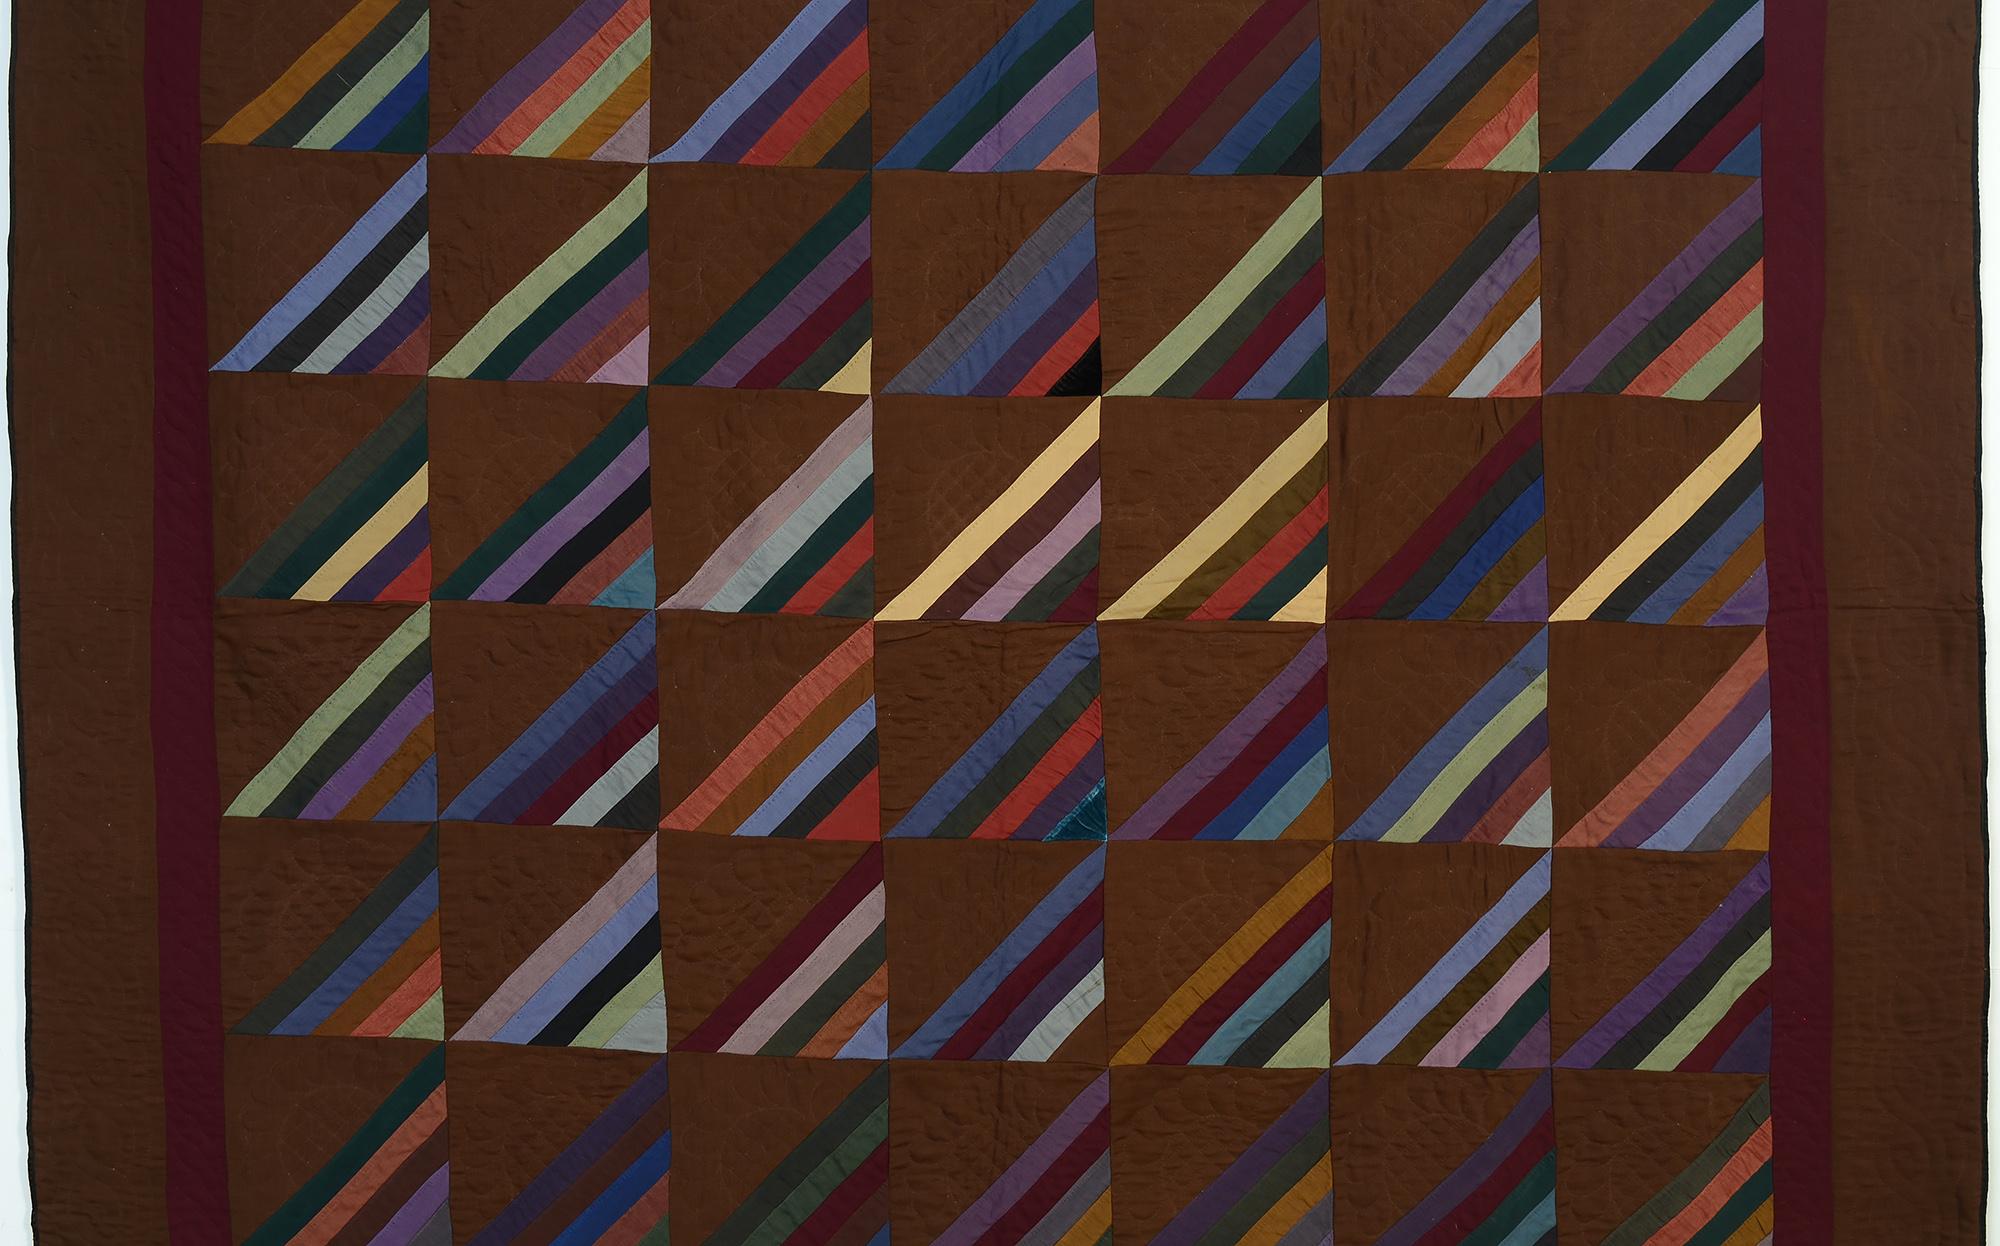 Stunning version of a Roman Stripe quilt done on an unusual dark brown ground. The quilt is almost all wool with occasional pieces of velvet and cotton sateen. The fabric of the maroon inner border is used throughout the quilt. Both borders are